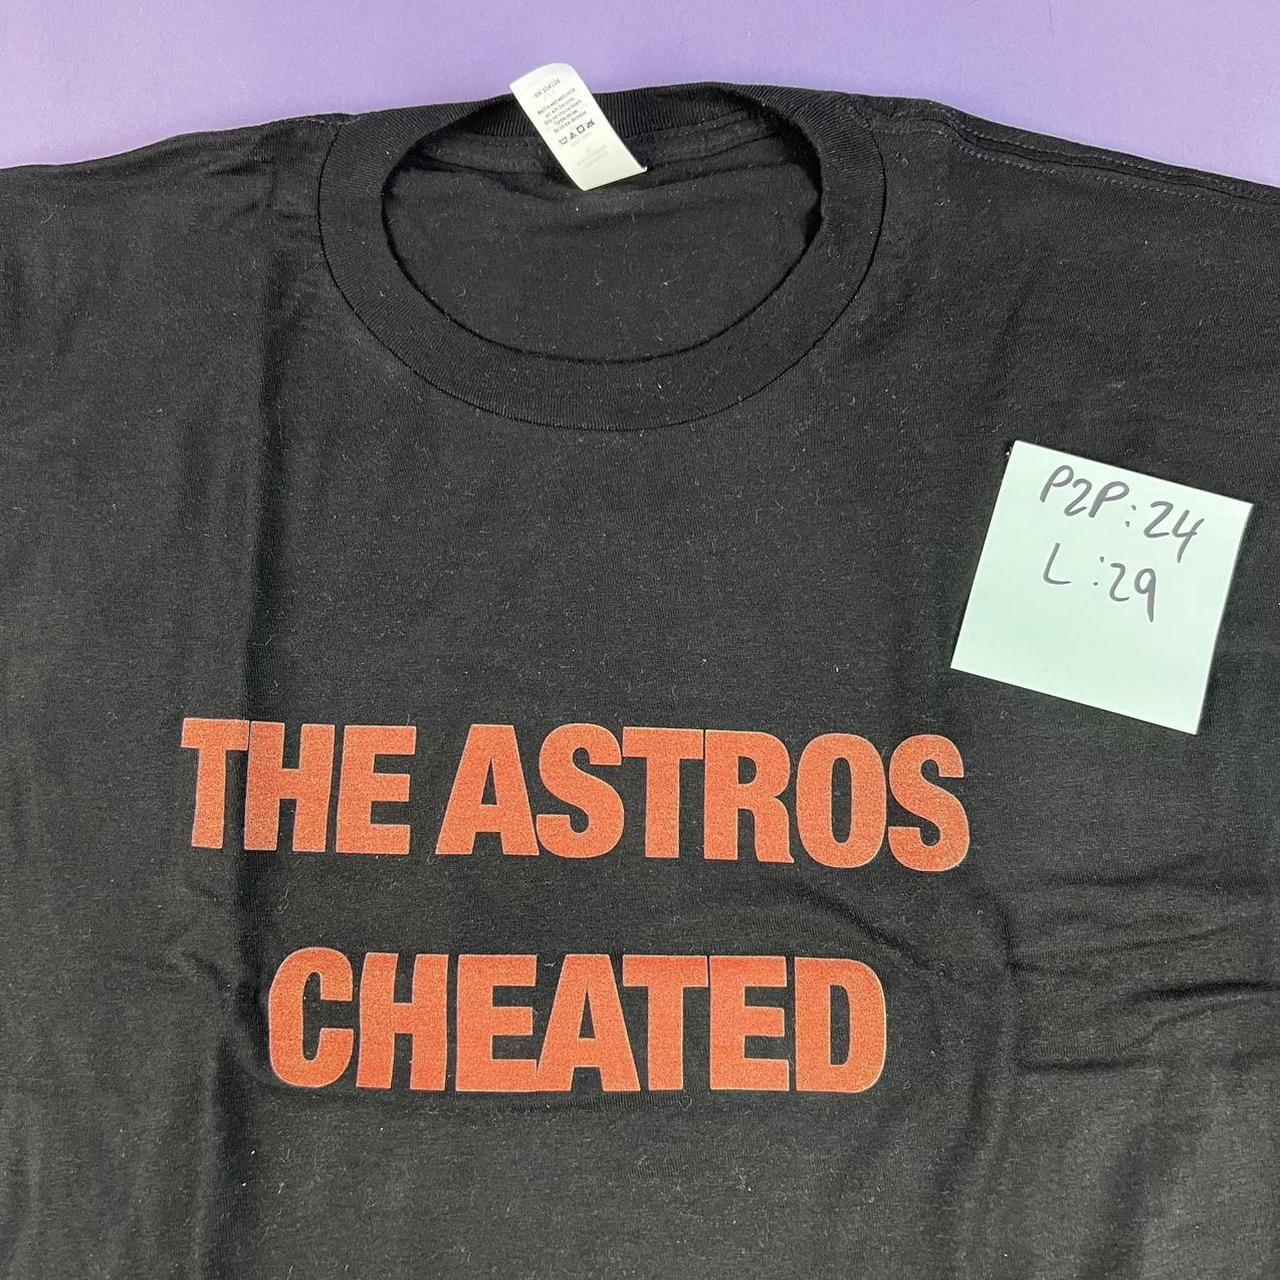 The Houston Astros desecrated the sport of baseball. - Depop